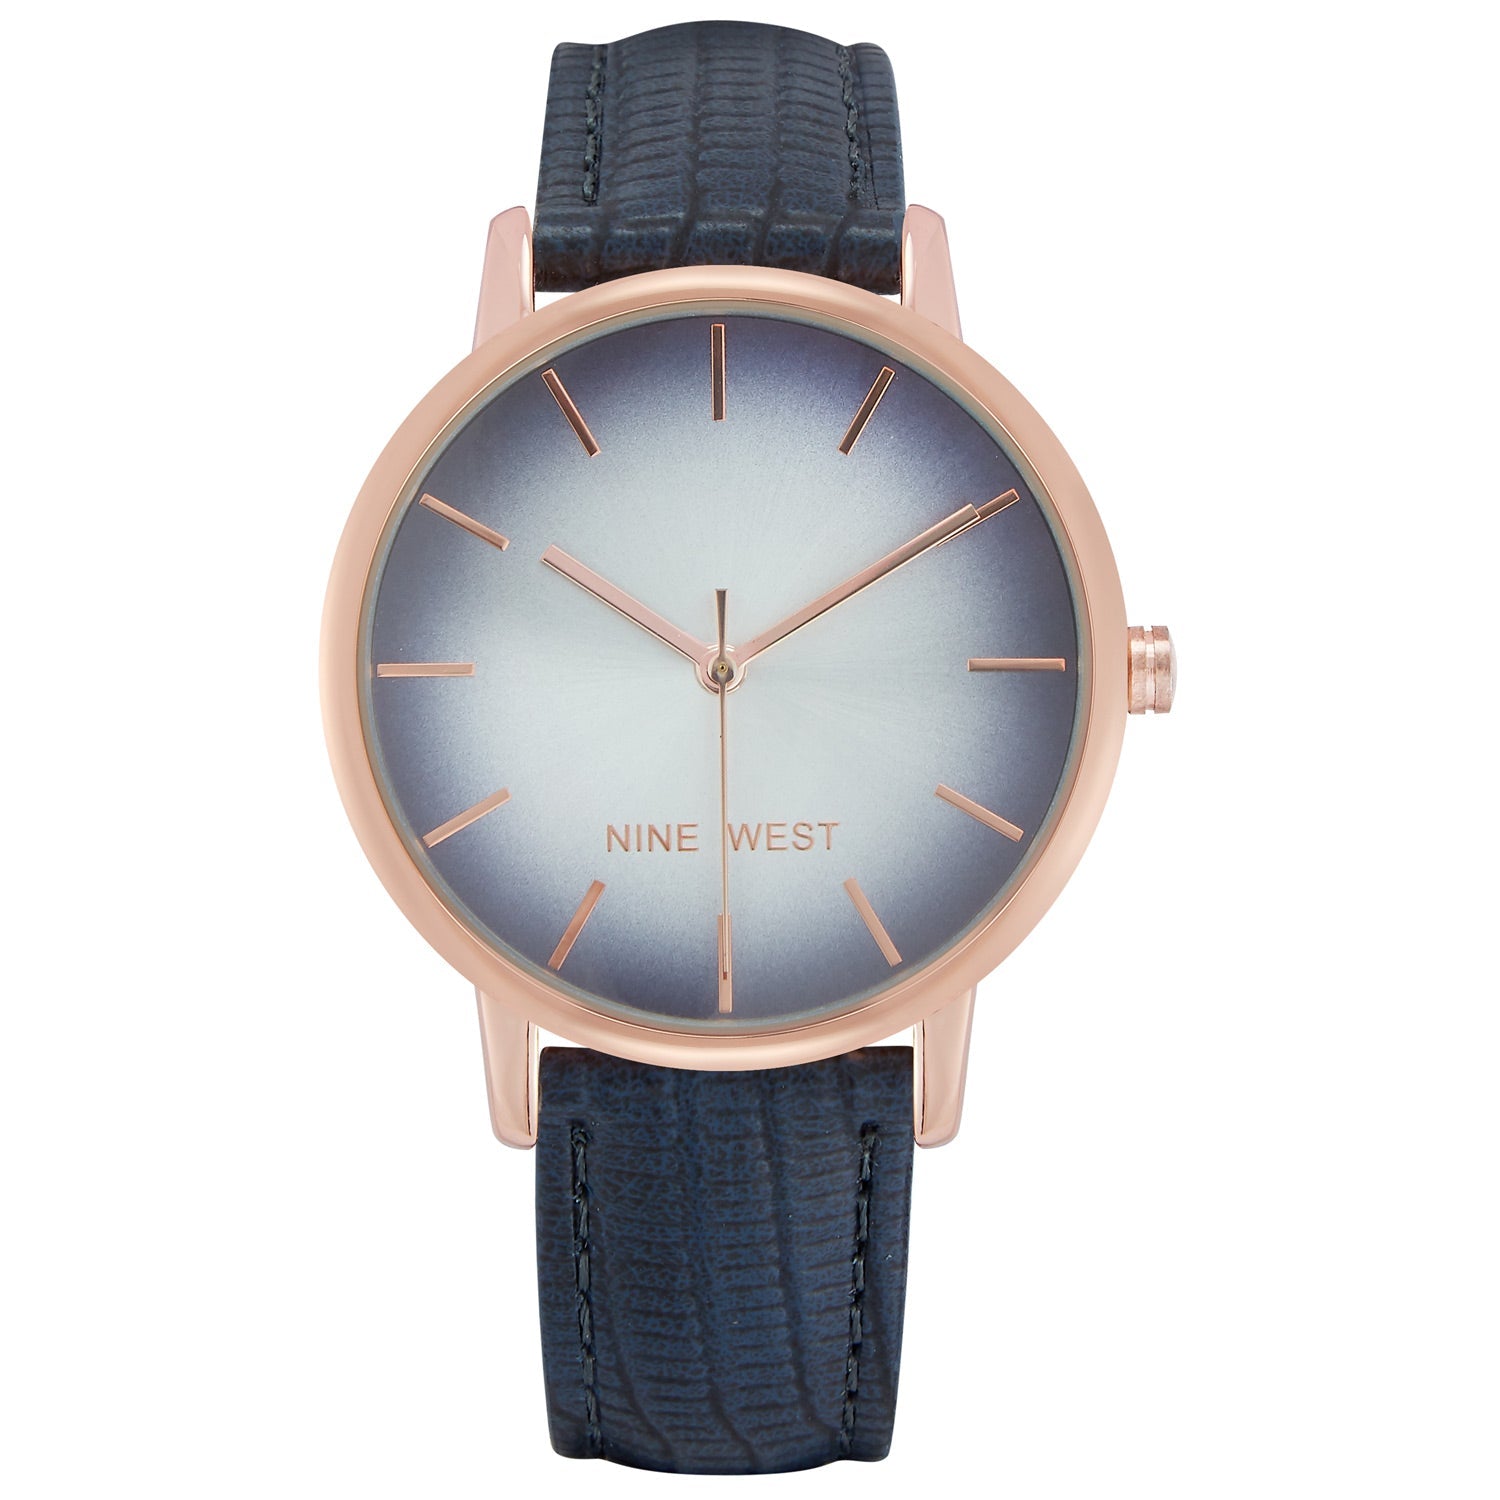 Nine West Rose Gold Watches for Woman - Fizigo